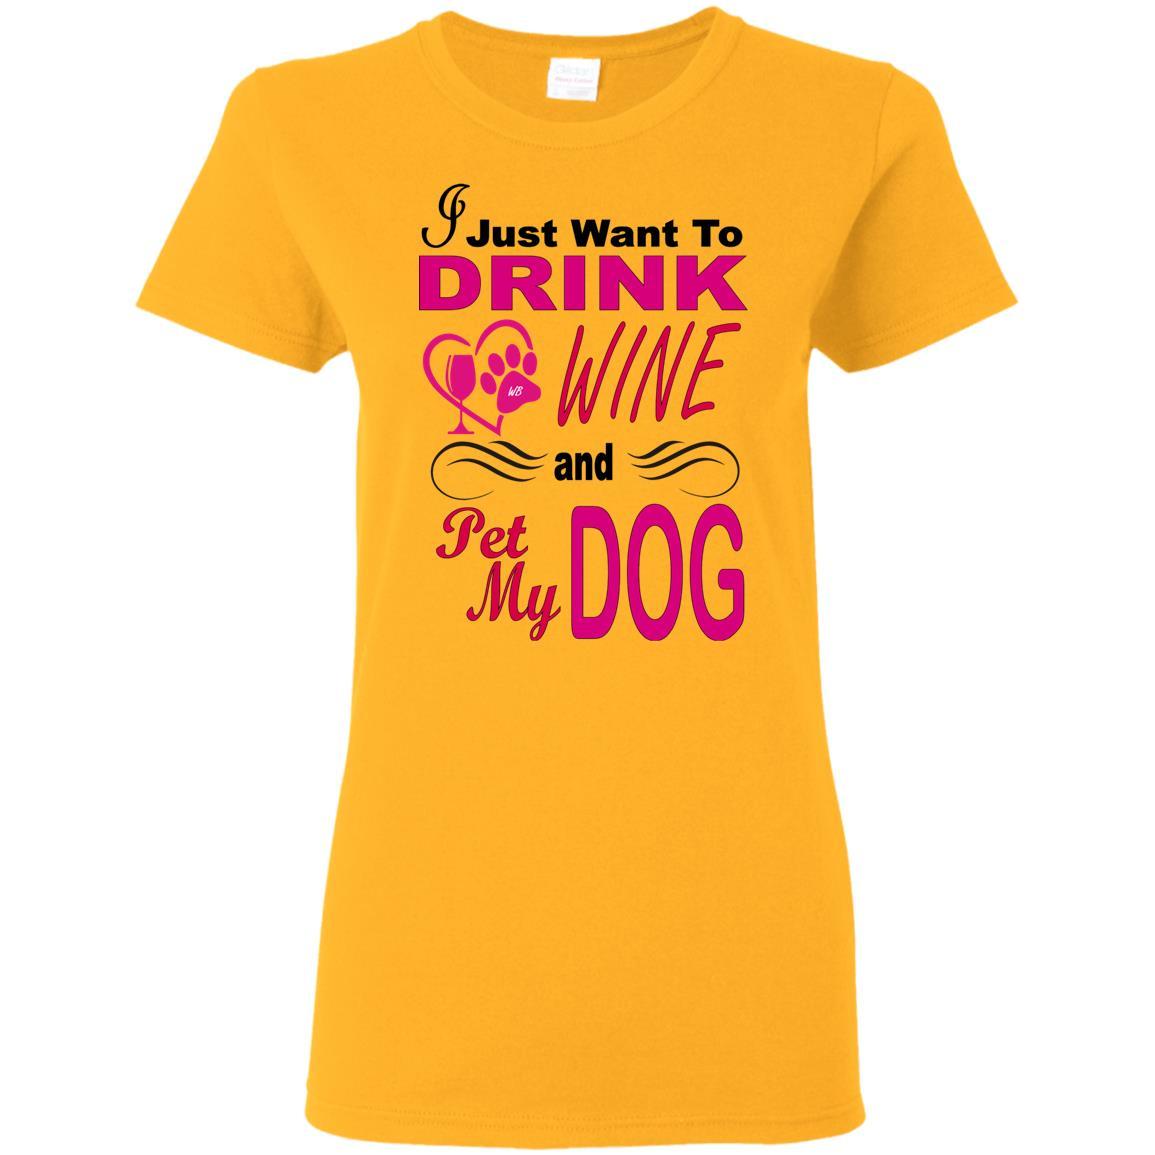 T-Shirts Gold / S WineyBitches.co You know you want to... "I Just Want To Drink Wine & Pet My Dog" Ladies T-Shirt WineyBitchesCo